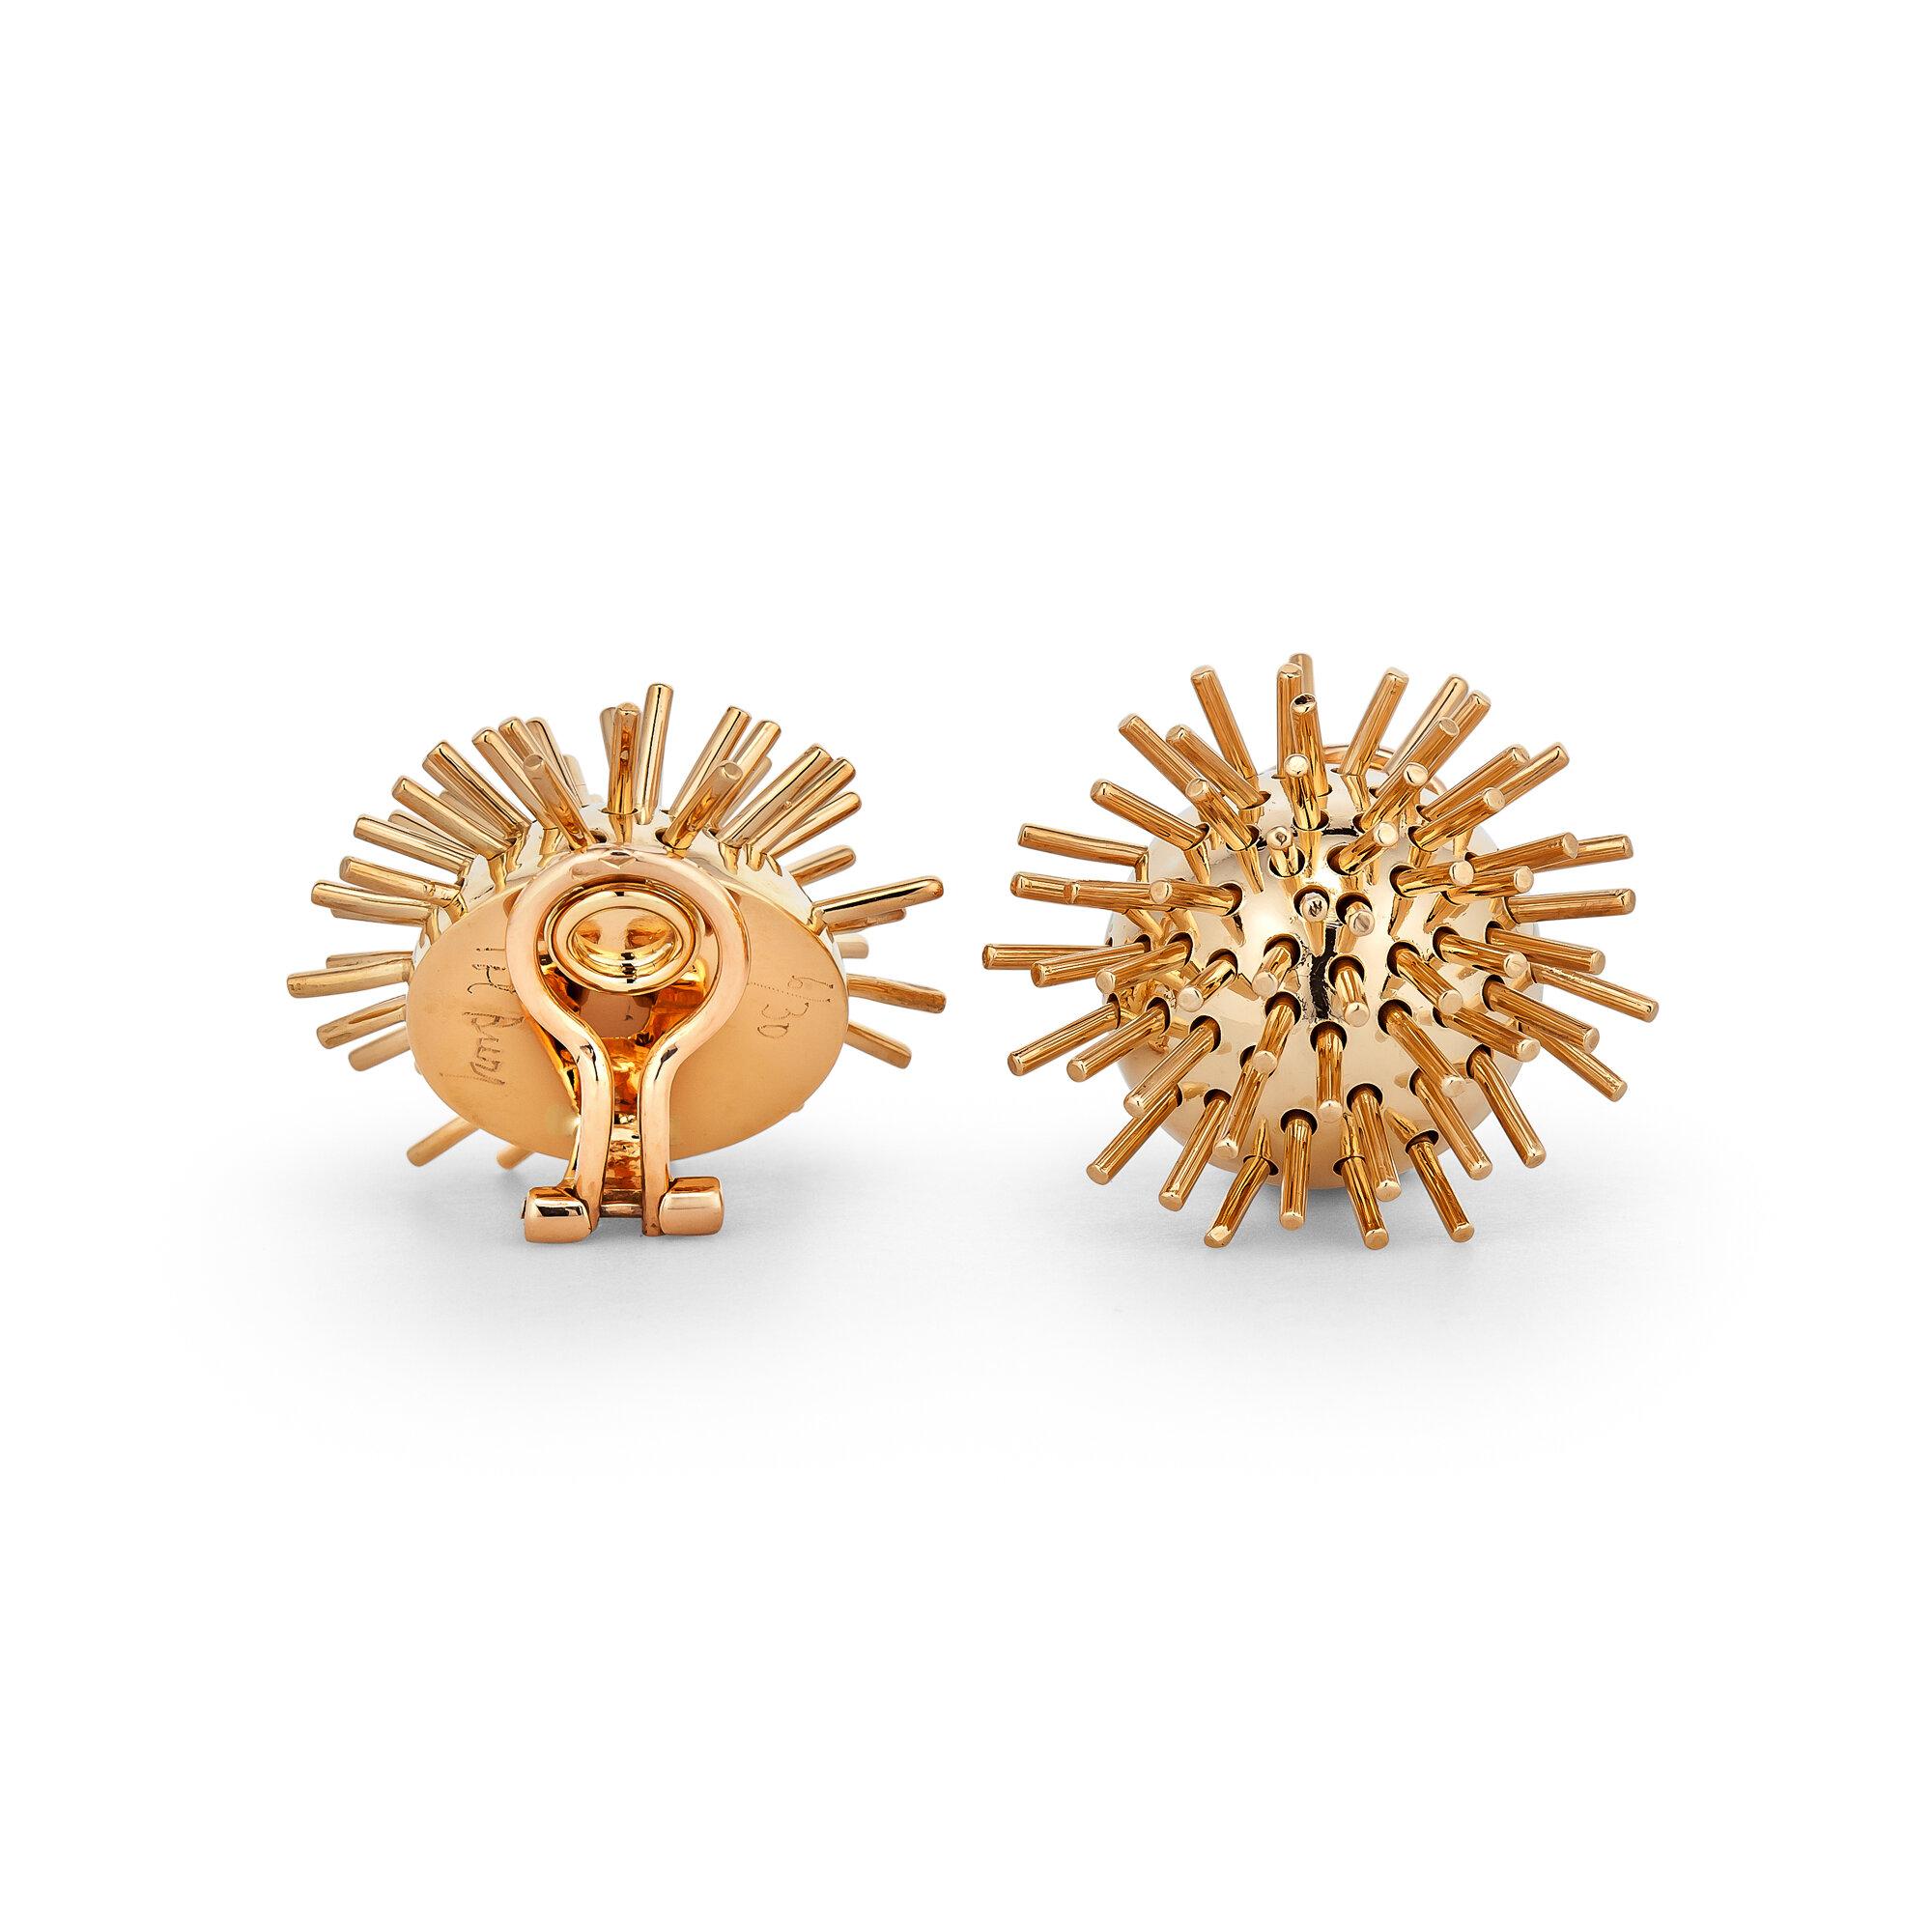 These signed Pol Bury Paris vintage gold 'sputnik' clip earrings are simply out of this world.  Designed in the 1970's and inspired by the kinetic movement, these bespoke earrings move with stylish energy and panache.  Signed Pol Bury.  Marked #6 of